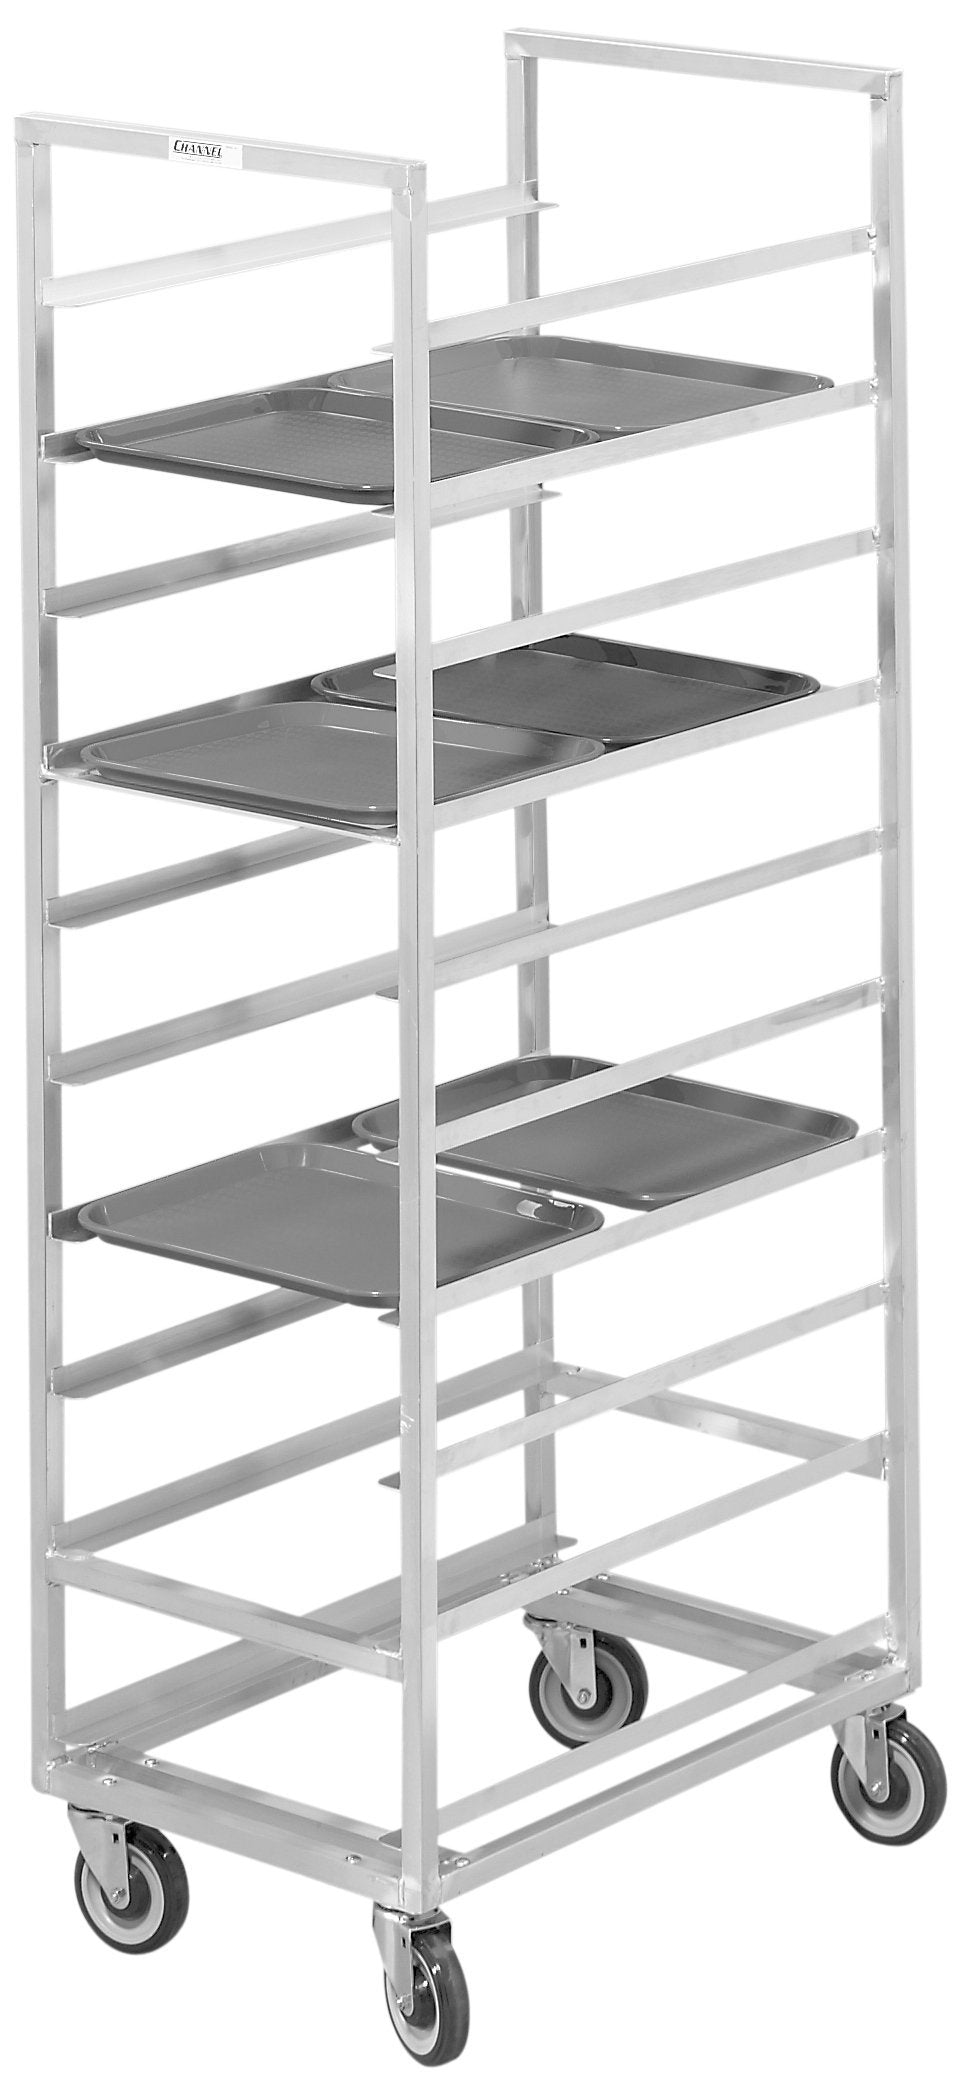 Channel Manufacturing 448A 20 Tray Bottom Load Aluminum Cafeteria Tray Rack - Assembled